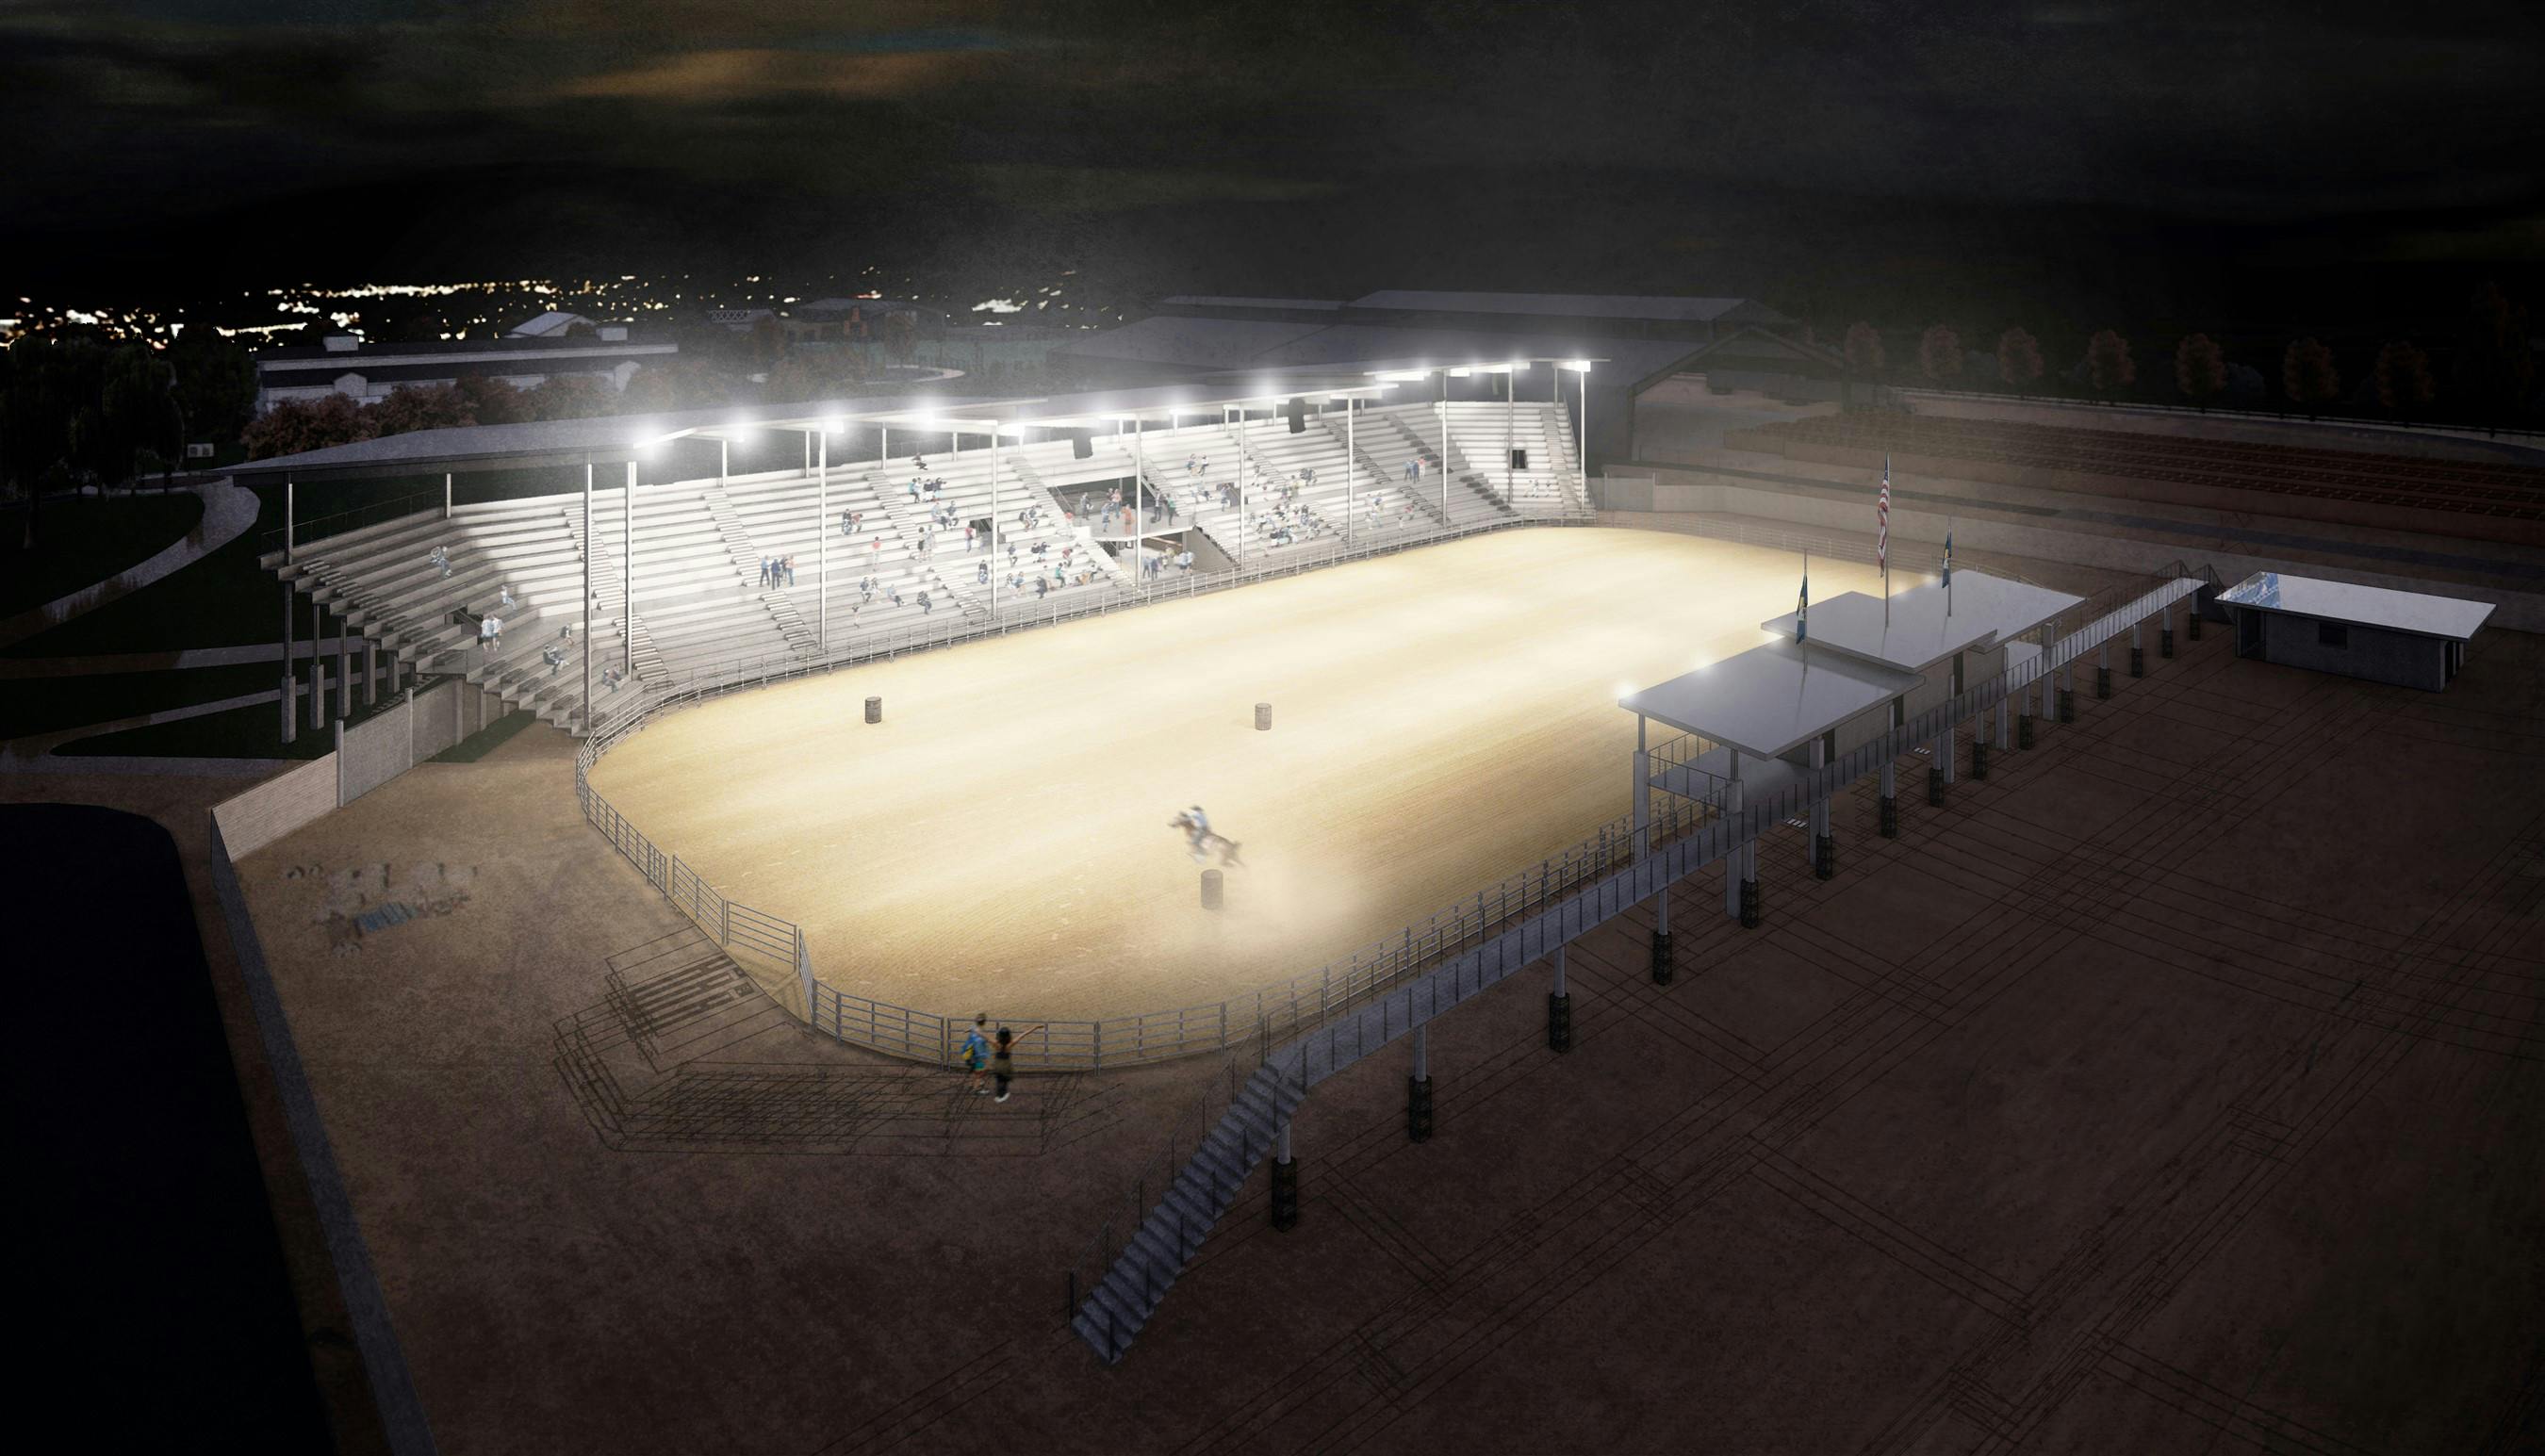 A rendering of the rodeo arena lit up at night.